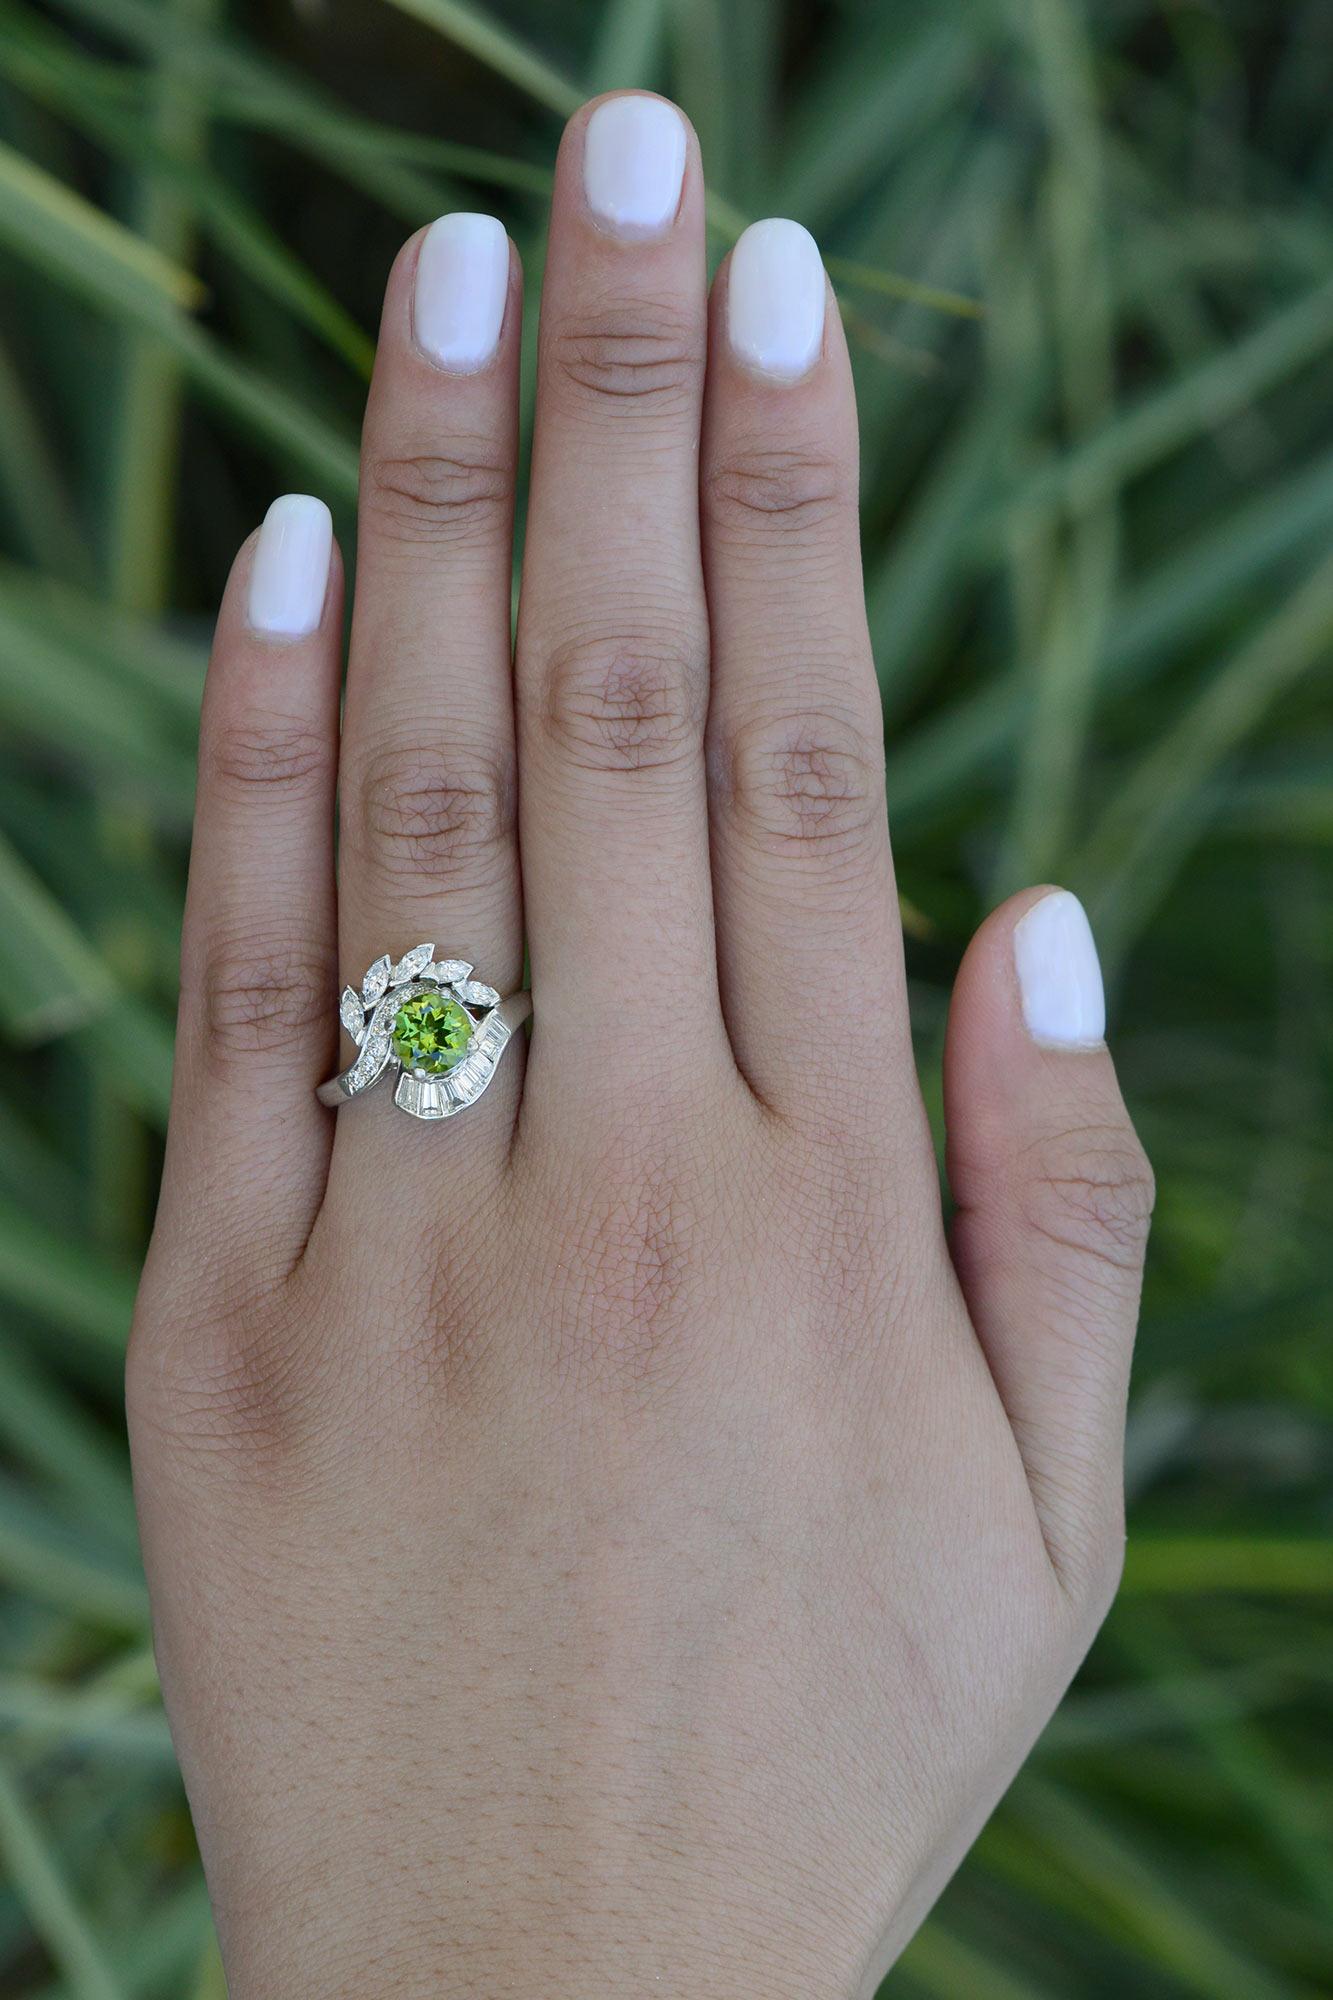 Your eyes have spotted a mid century peridot engagement ring, with an alluring design. The platinum setting is adorned with over a carat of sparkling diamonds, creating lush lashes, with a top quality gemstone peering out. A vintage gemstone bridal